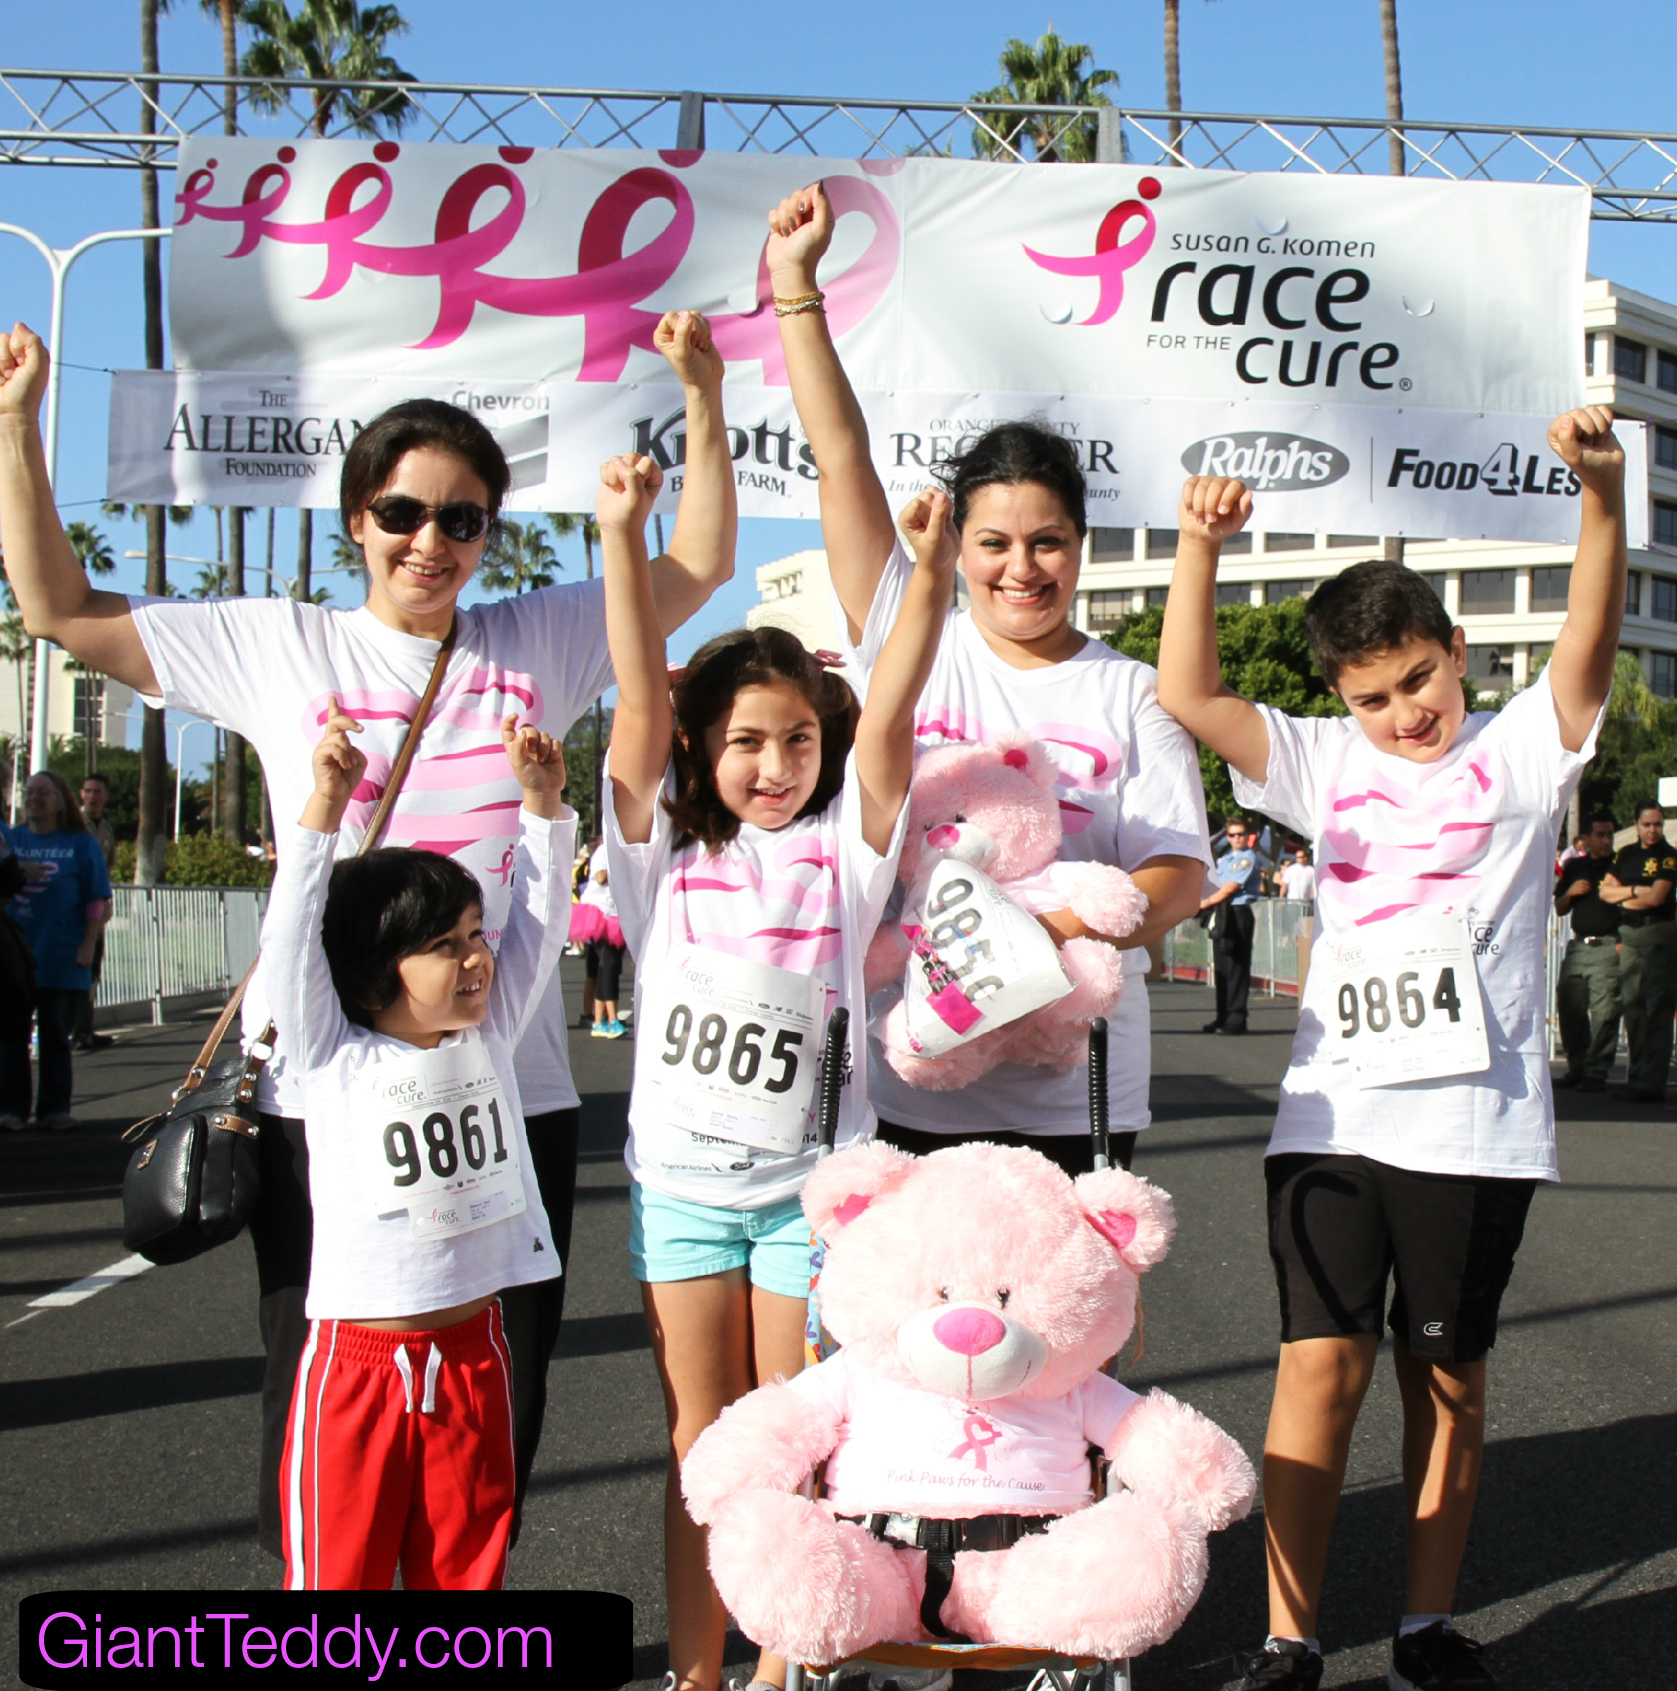 Giant Teddy team at the 2014 Susan G. Komen Orange County Race for the Cure